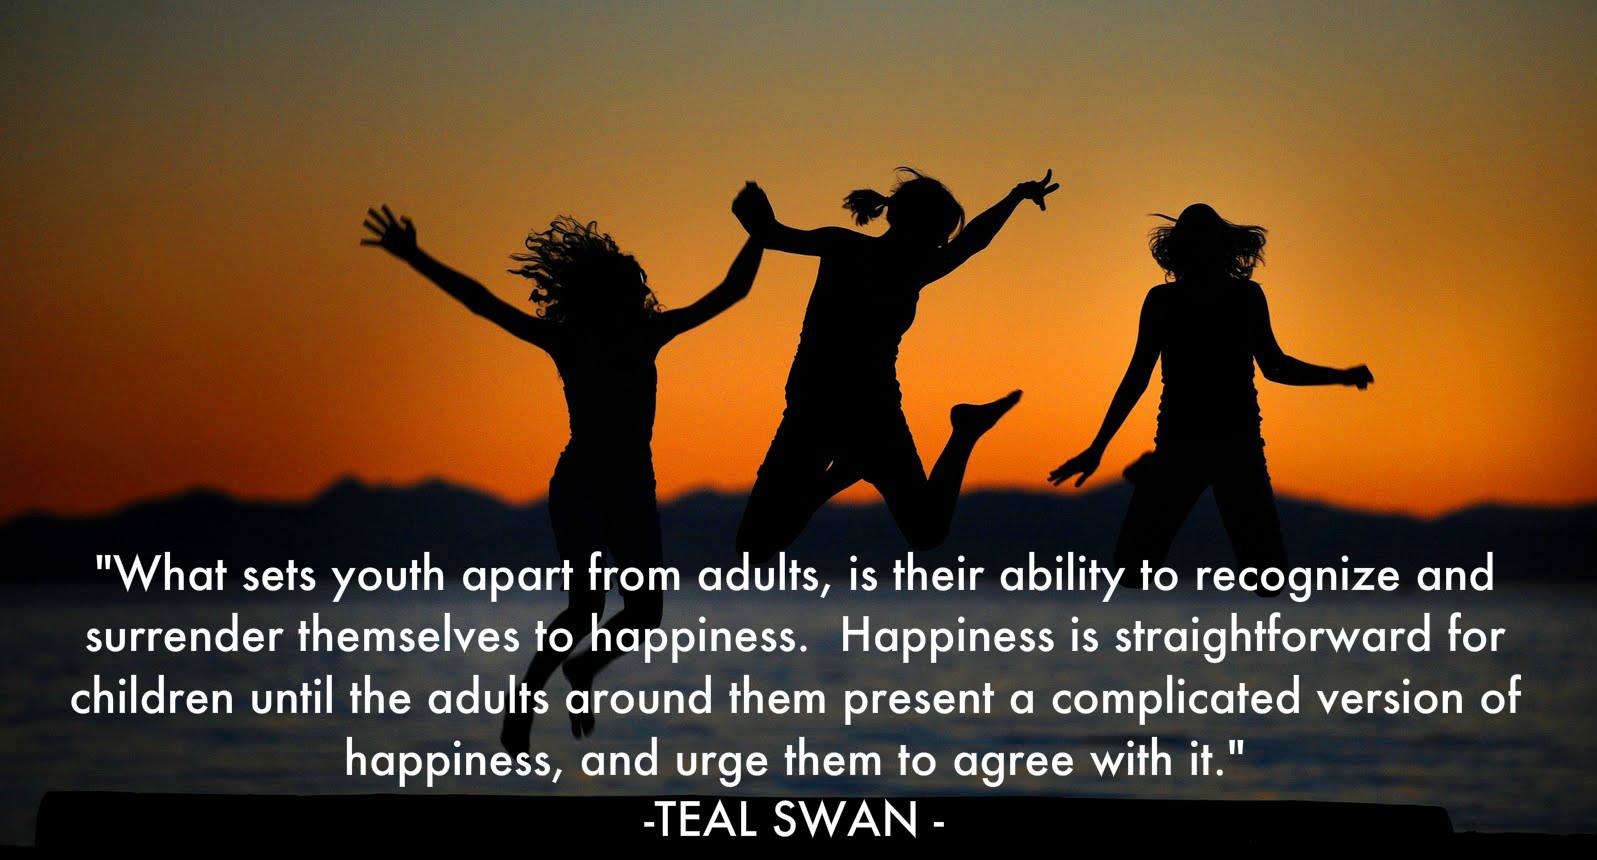 What sets youth apart from adults, is their ability to recognize and surrender themselves to happiness. Happiness is straightforward for children ... Teal Swan